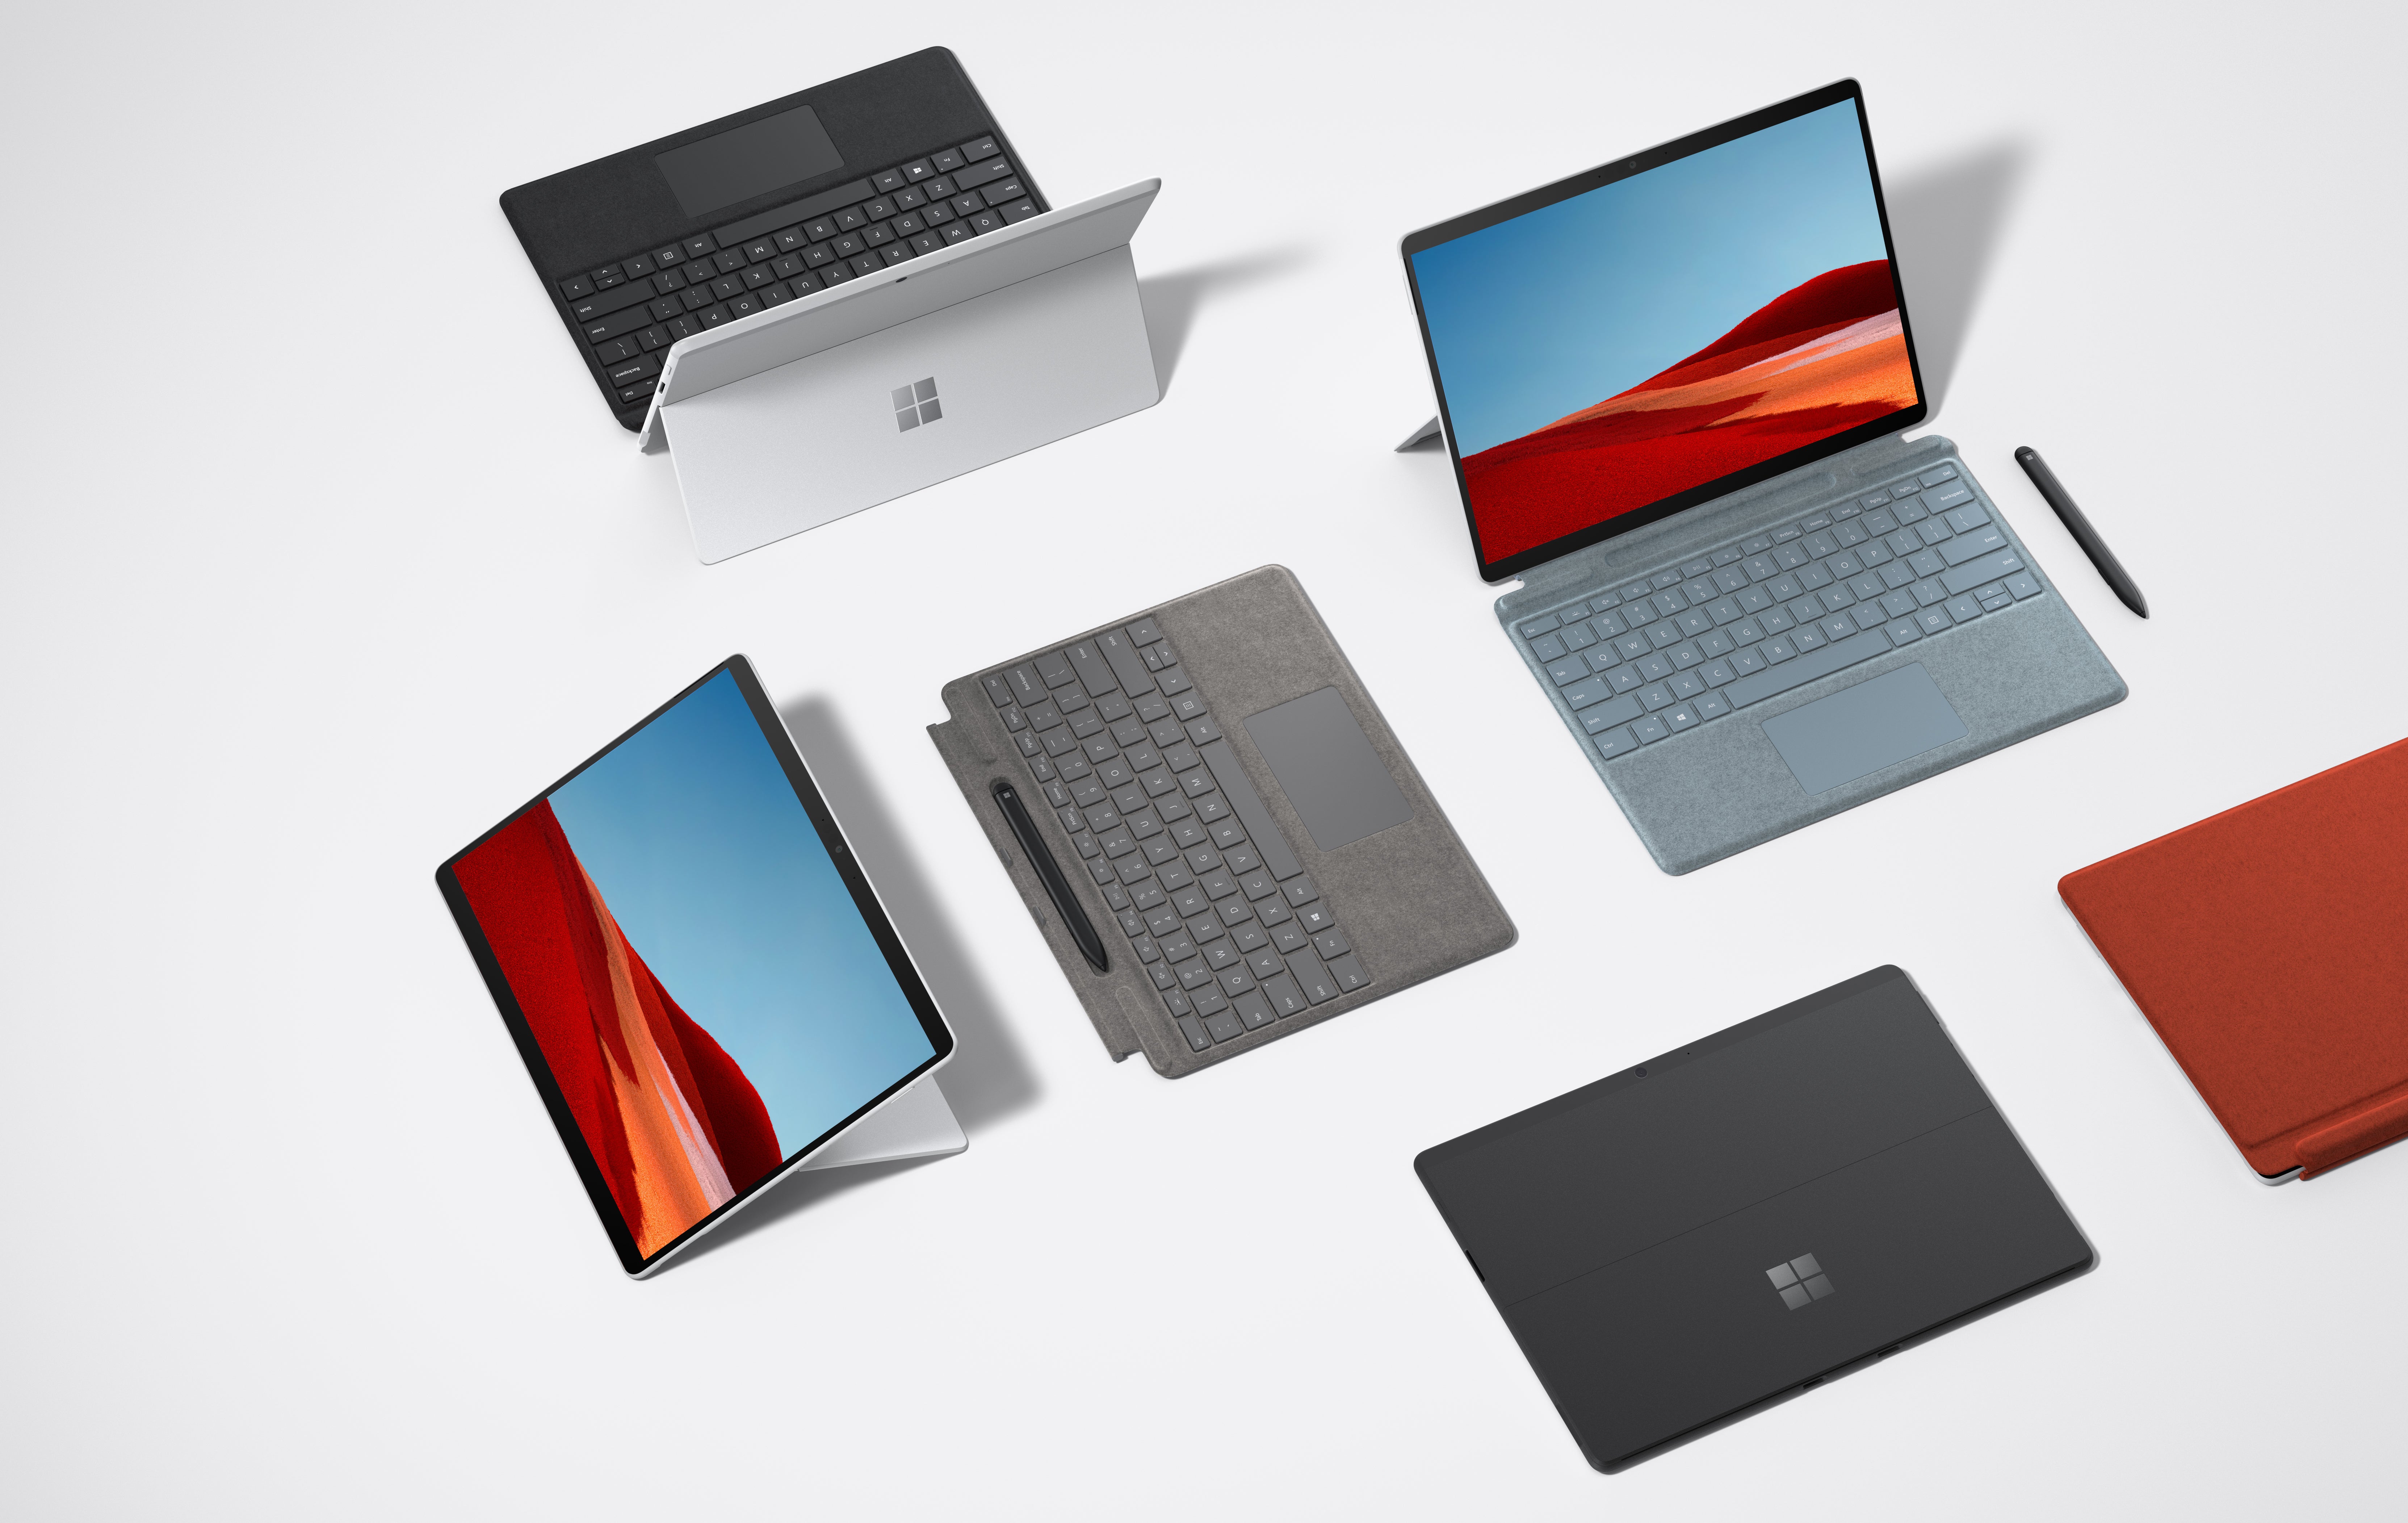 surface pro x for business